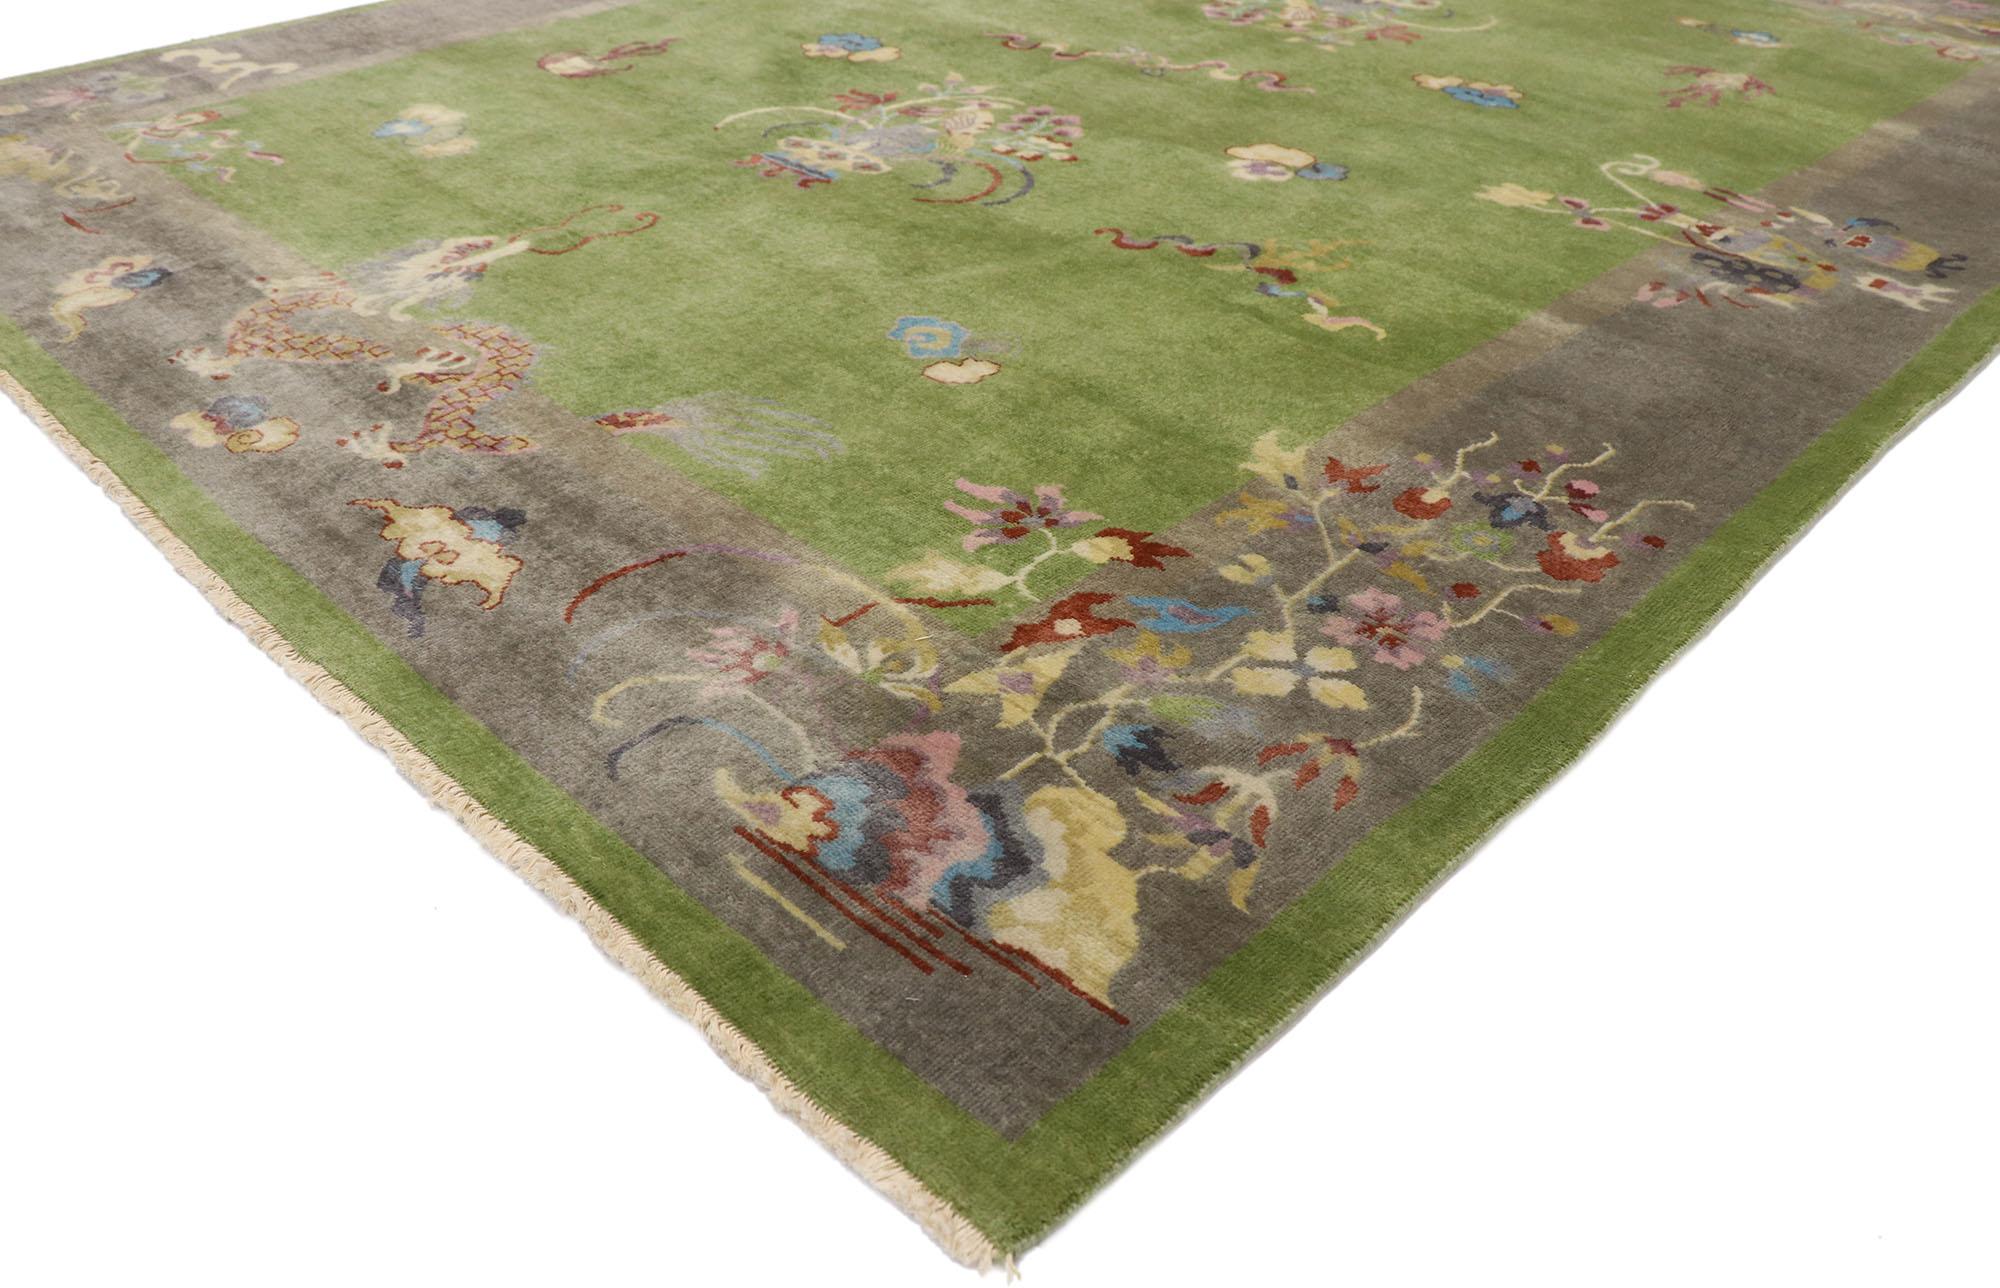 30643, new Contemporary Chinese Art Deco style Pictorial Dragon rug. This hand-knotted wool contemporary Chinese Art Deco style rug features a variety of pictorial images overlaid upon an abrashed color-blocked field and border scheme. An array of